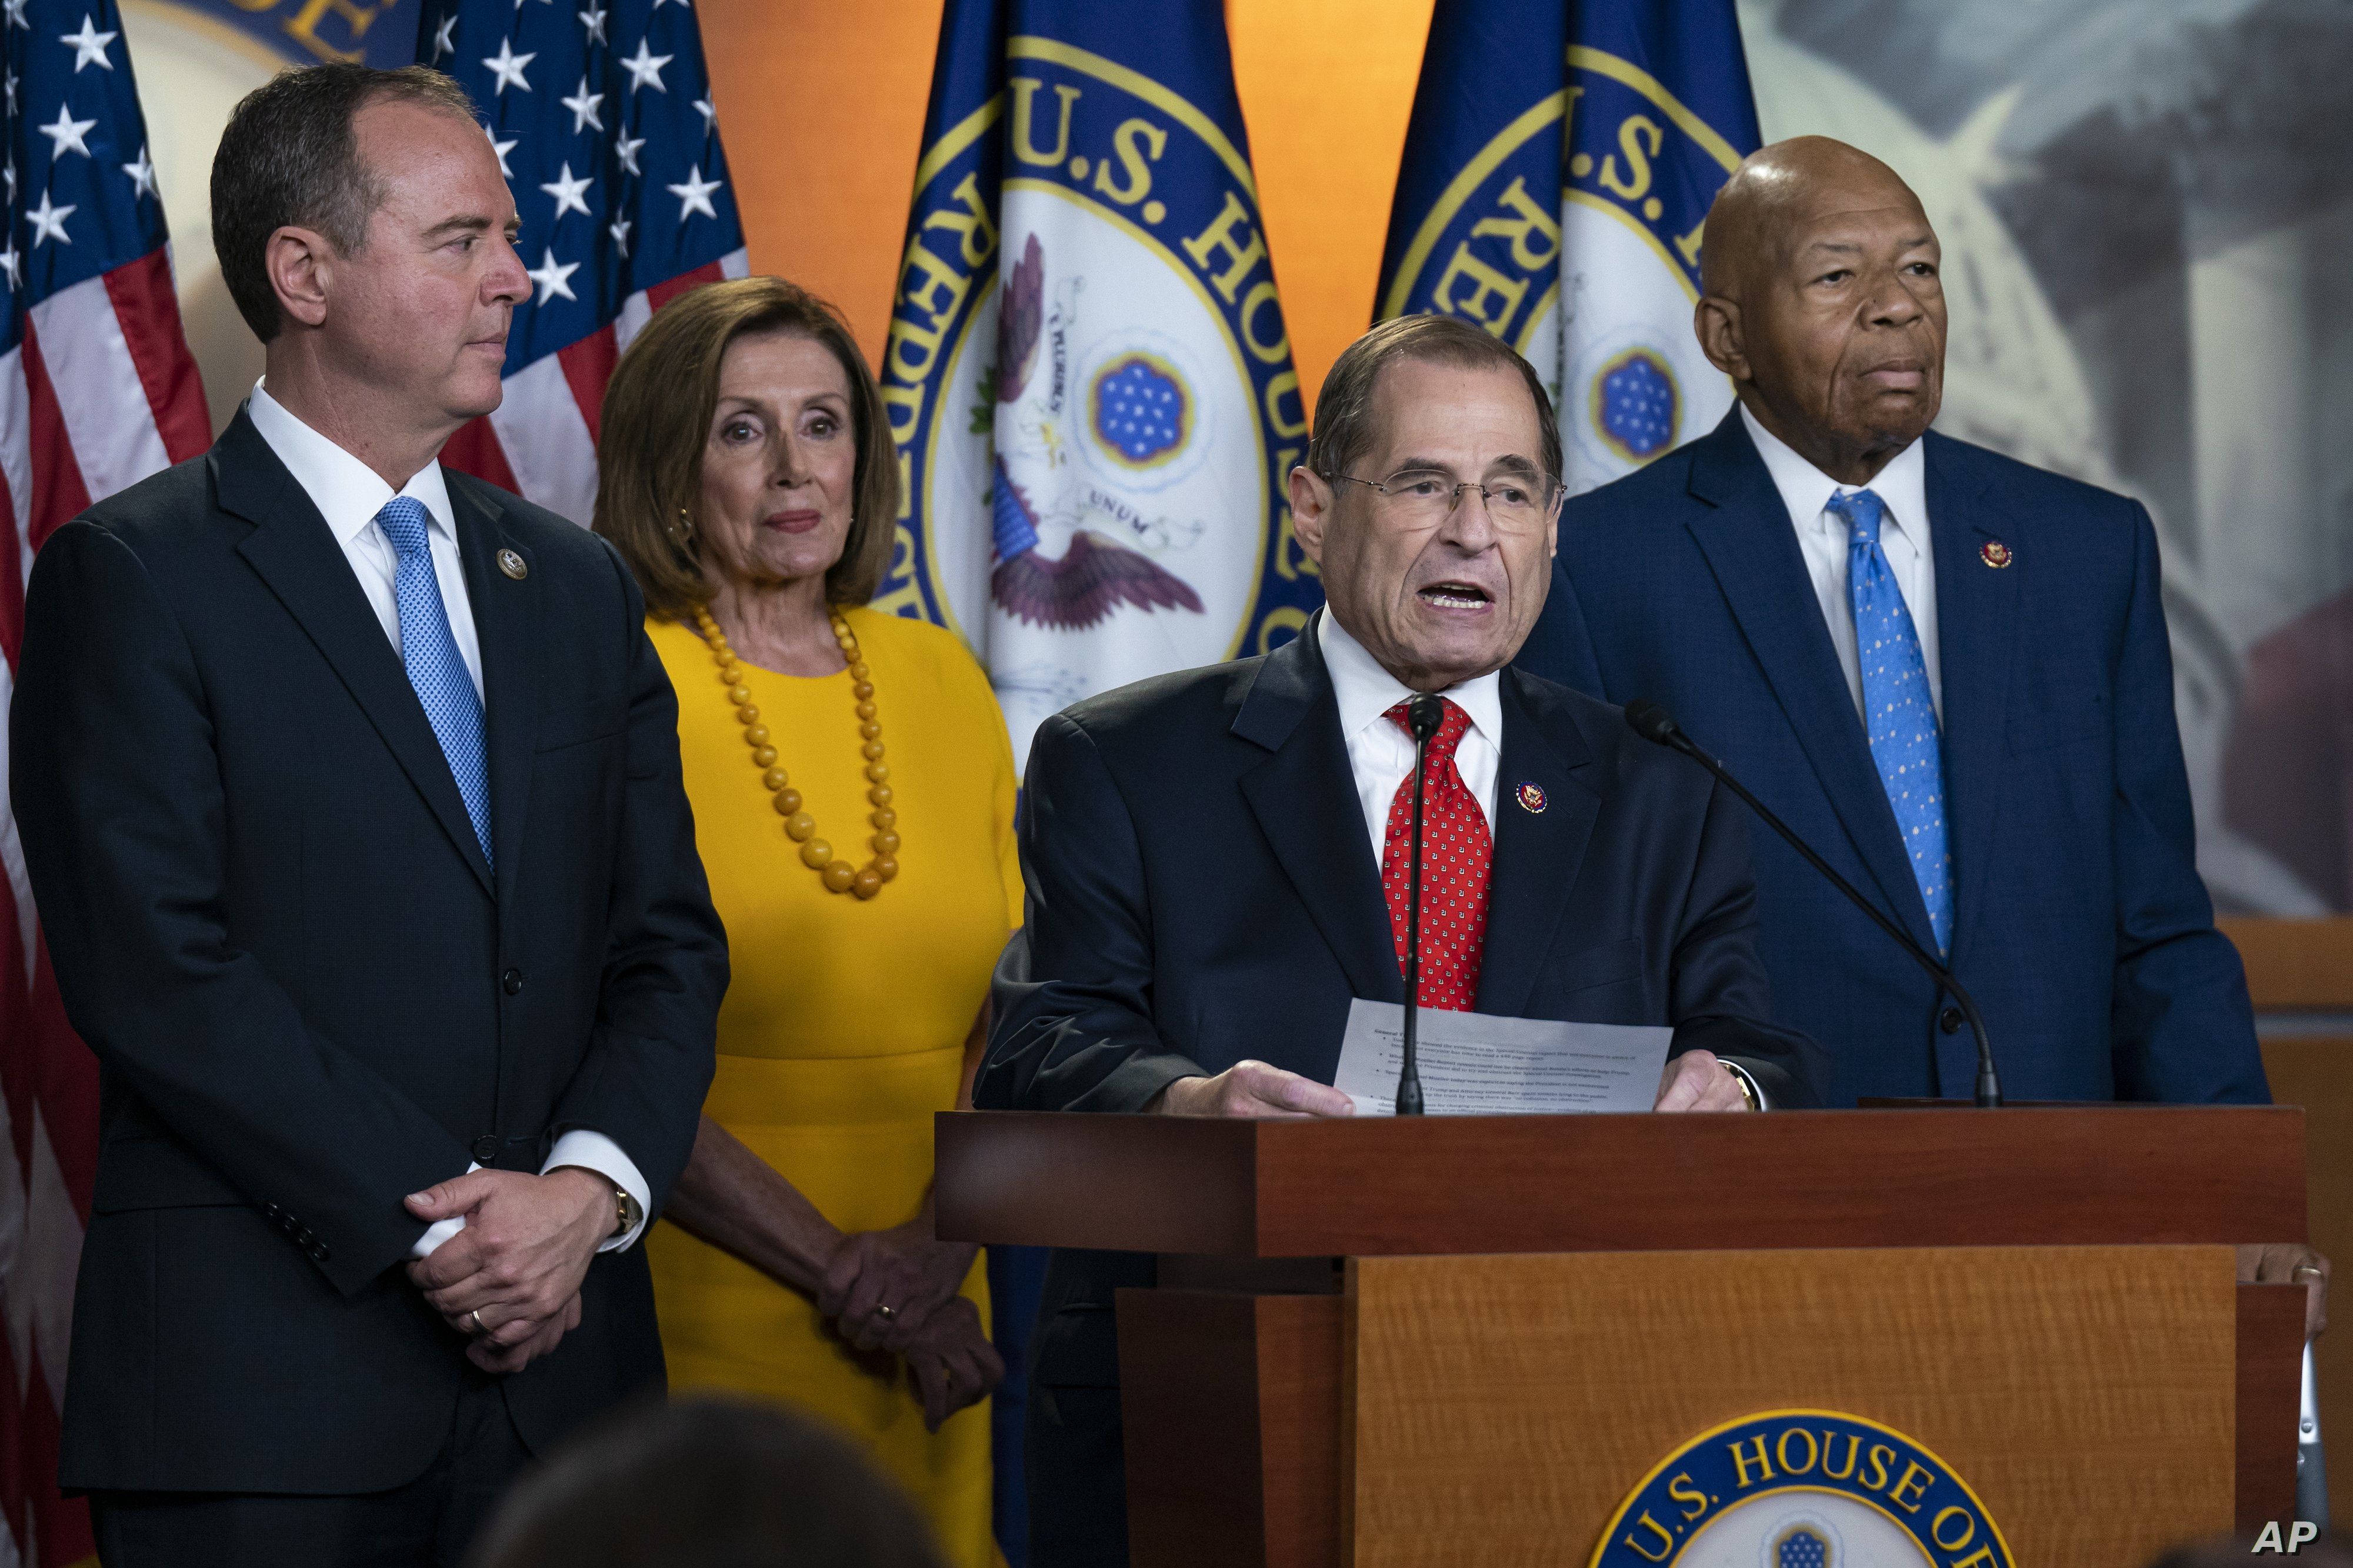 House Intelligence Committee Chairman Adam Schiff,  Speaker of the House Nancy Pelosi, House Judiciary Committee Chairman Jerrold Nadler, and House Oversight Committee Chairman Elijah Cummings after hearings with former special counsel Robert Mueller, July 24, 2019, in Washington.